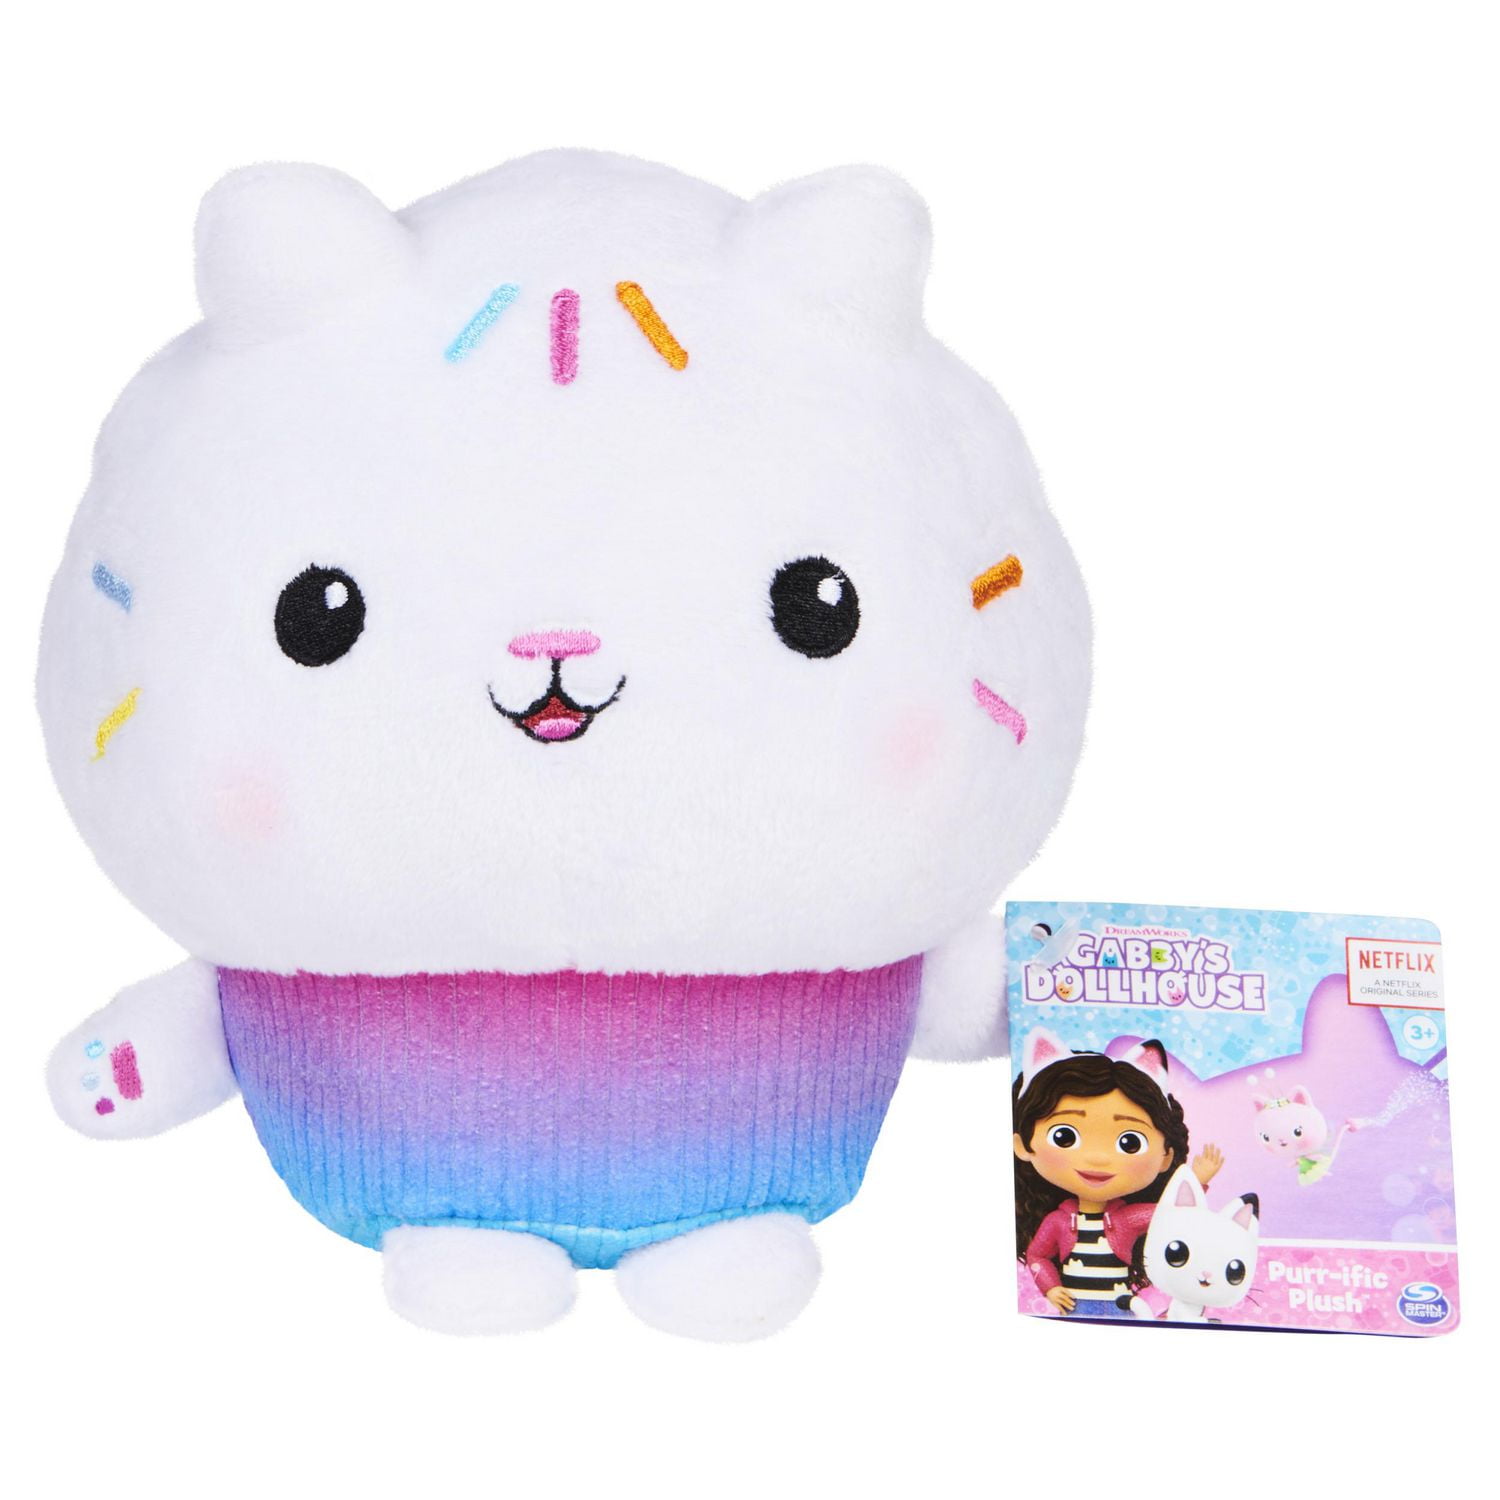 Big Plushie Slippers - Short Plush - Rubber - White - Pink from Apollo Box